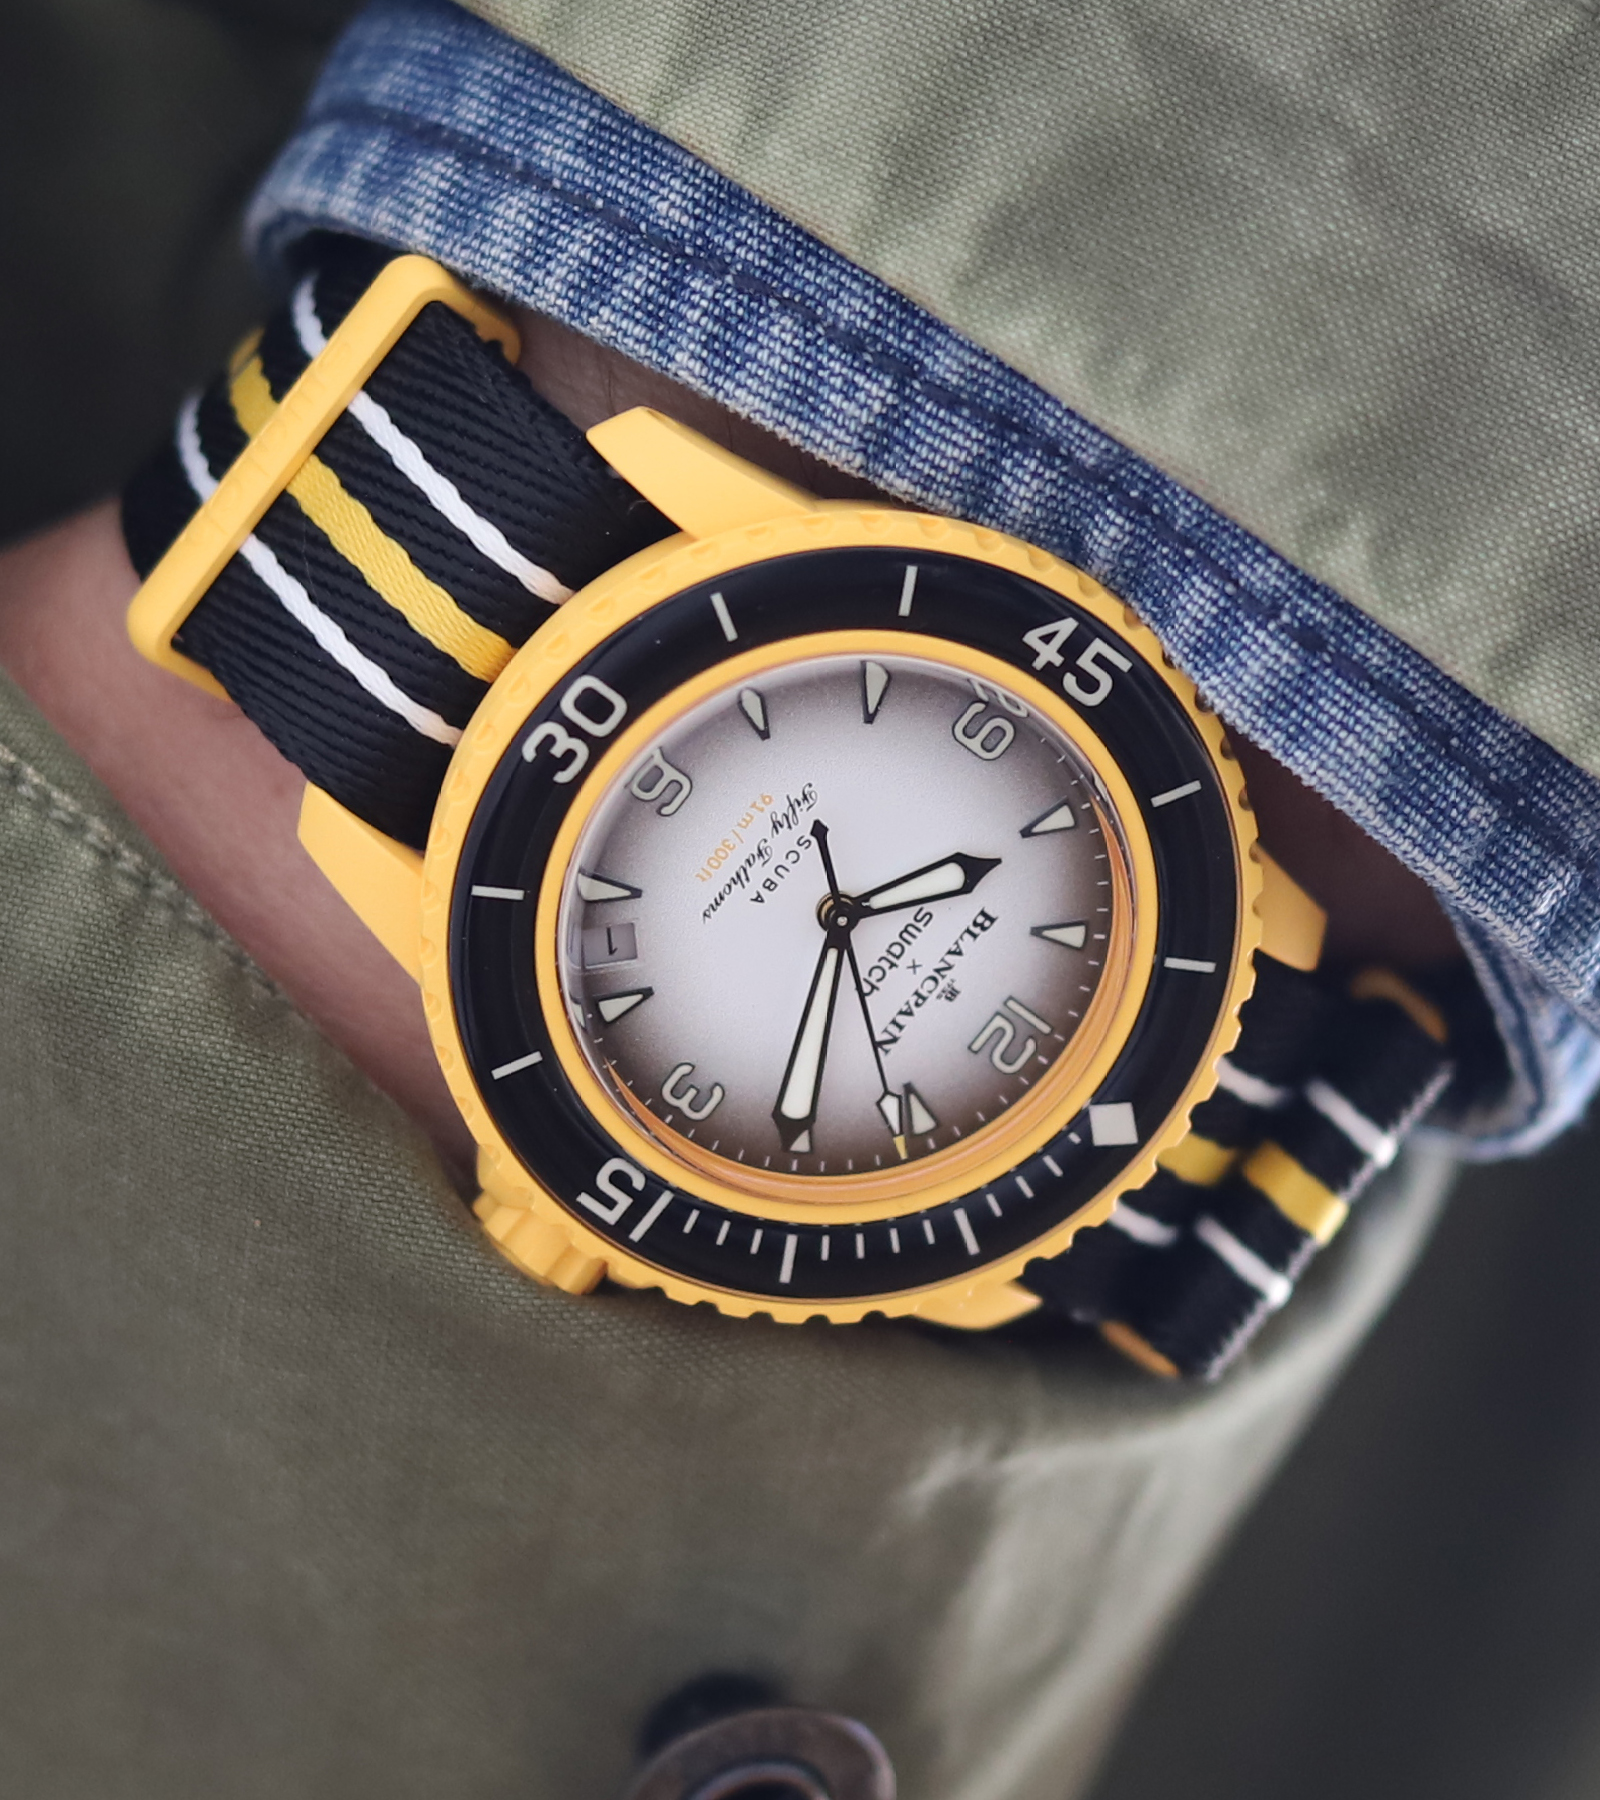 Hold Your Breath: The Blancpain X Swatch Scuba Fifty Fathoms is